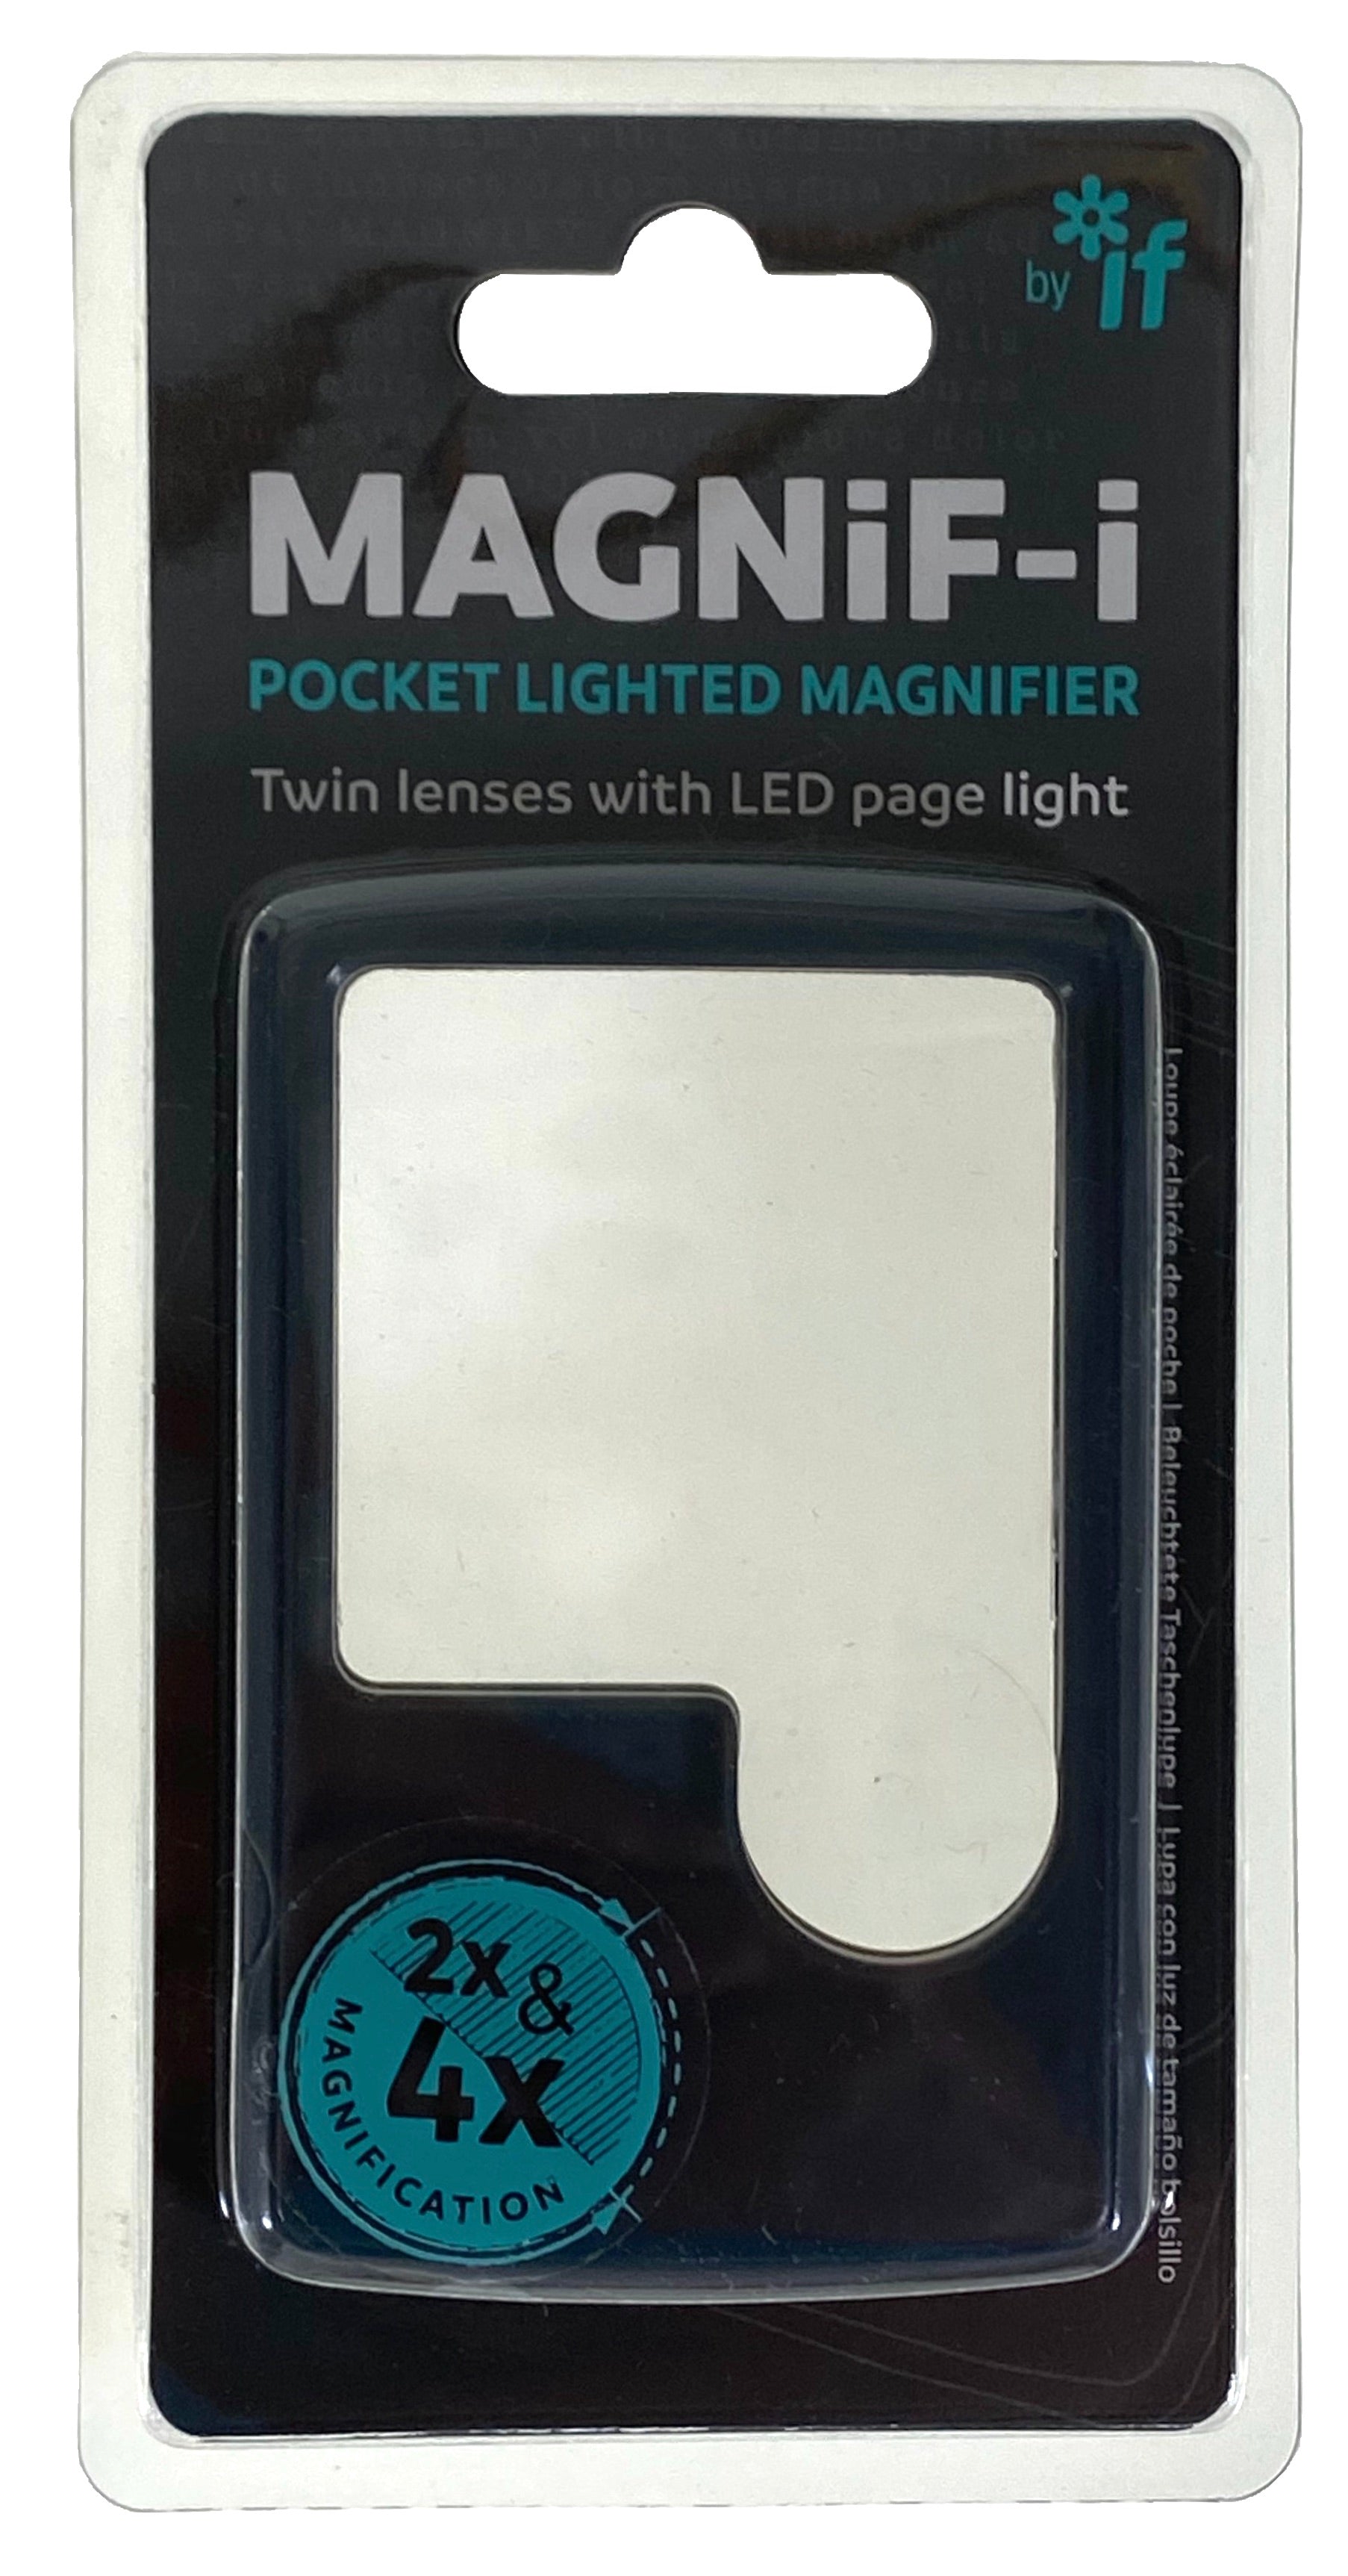 Magnif-i Pocket Lighted Magnifier - 2x and 4 Magnification    